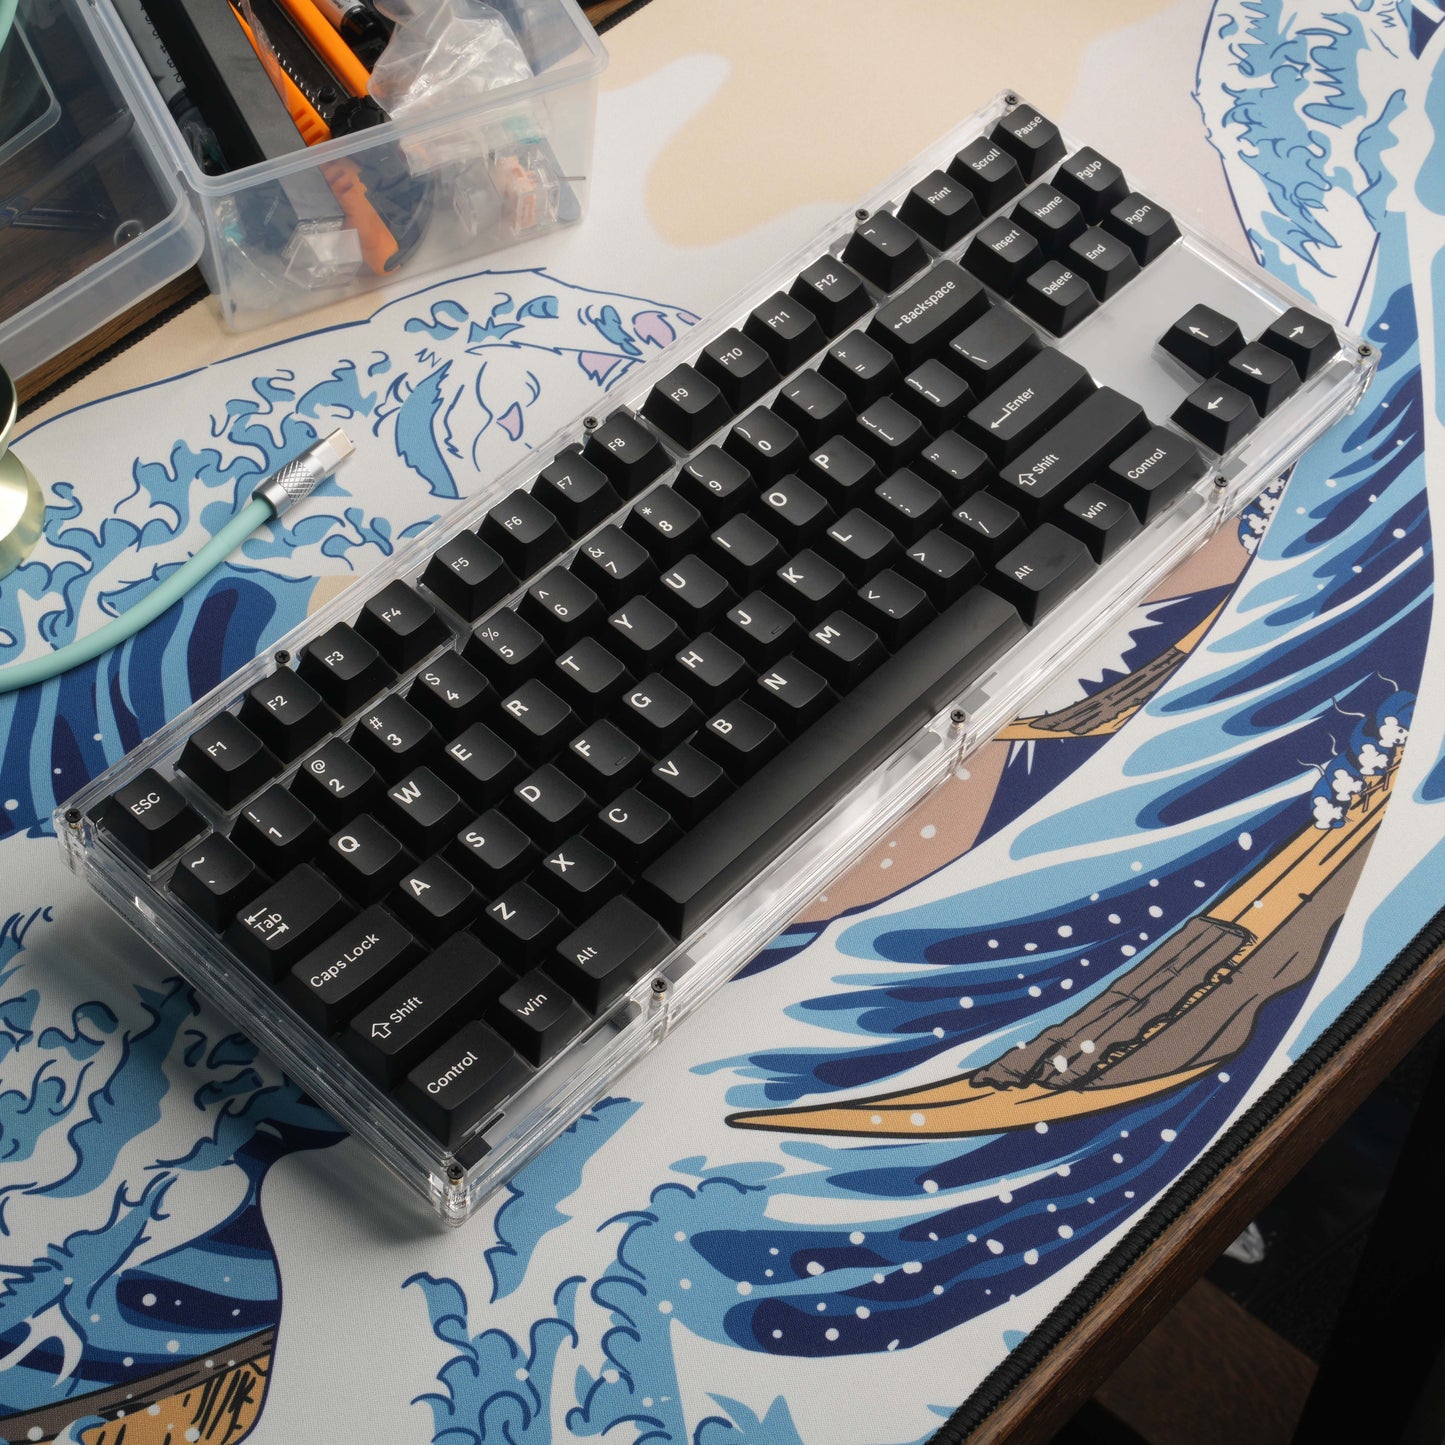 Just another Acrylic TKL [Do not order]